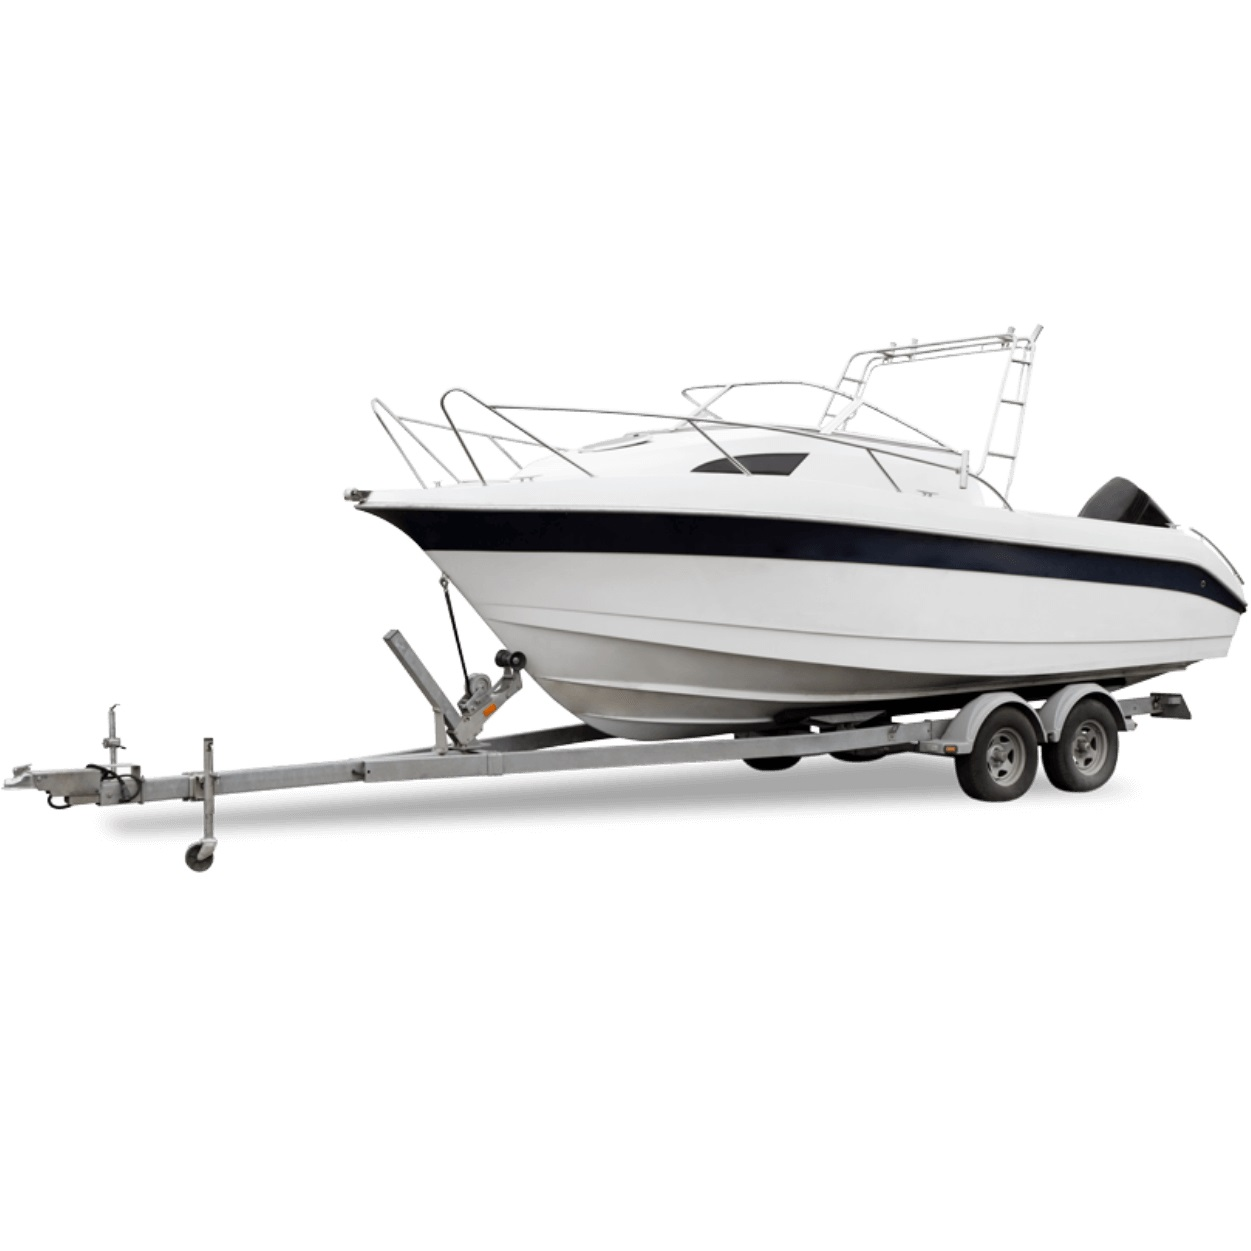 Marine Boat Yacht Trailers Parts Accessories